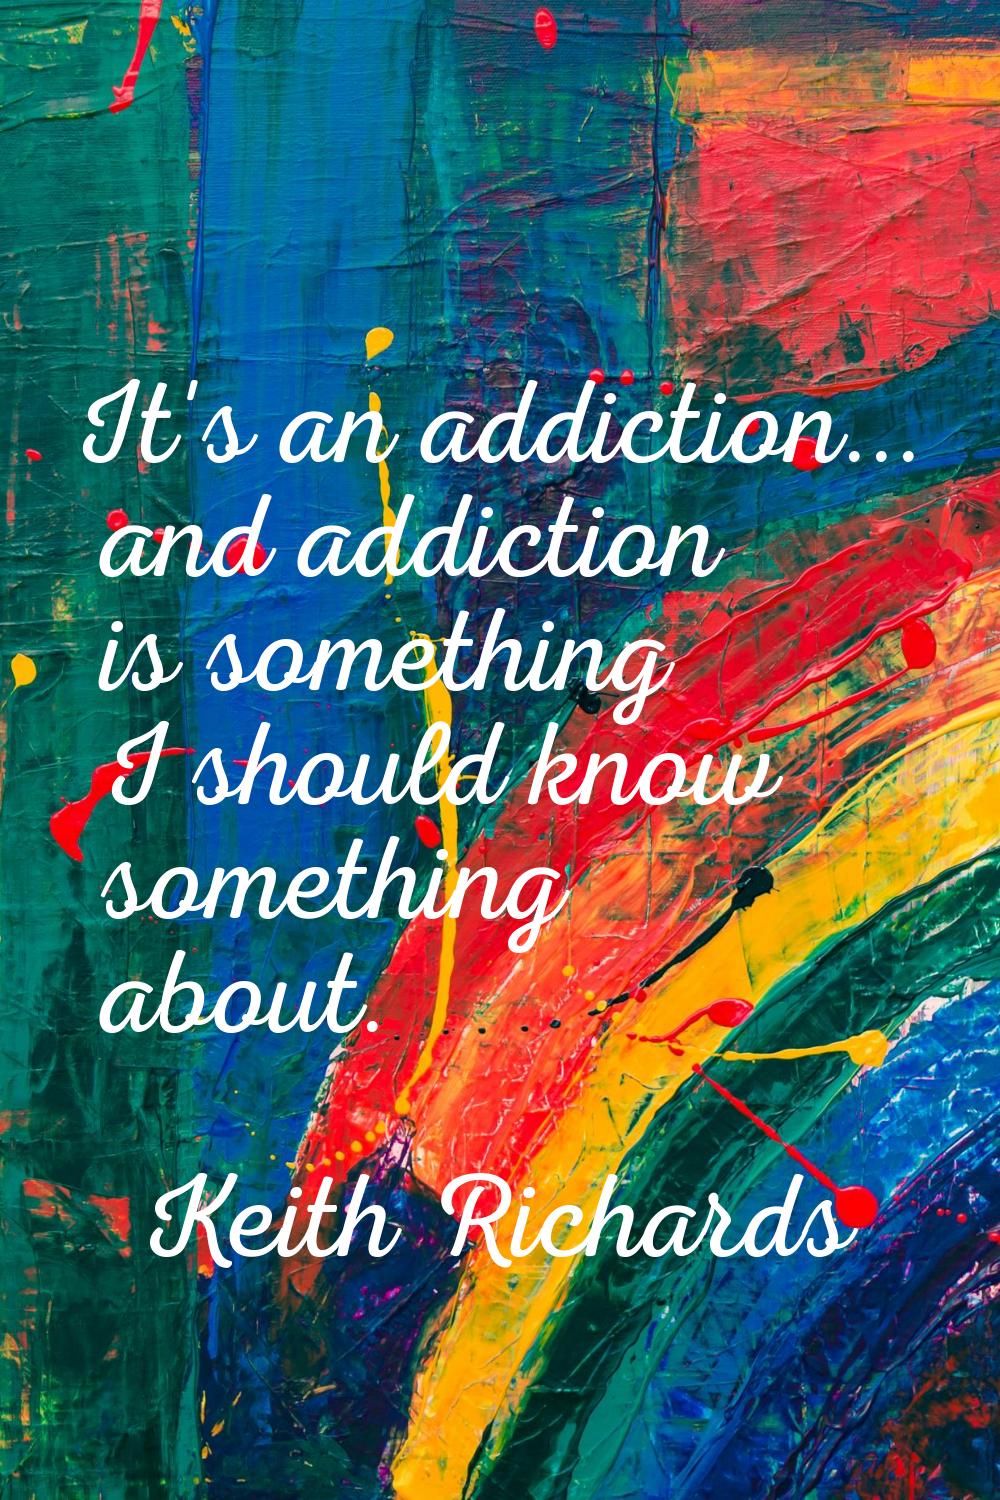 It's an addiction... and addiction is something I should know something about.